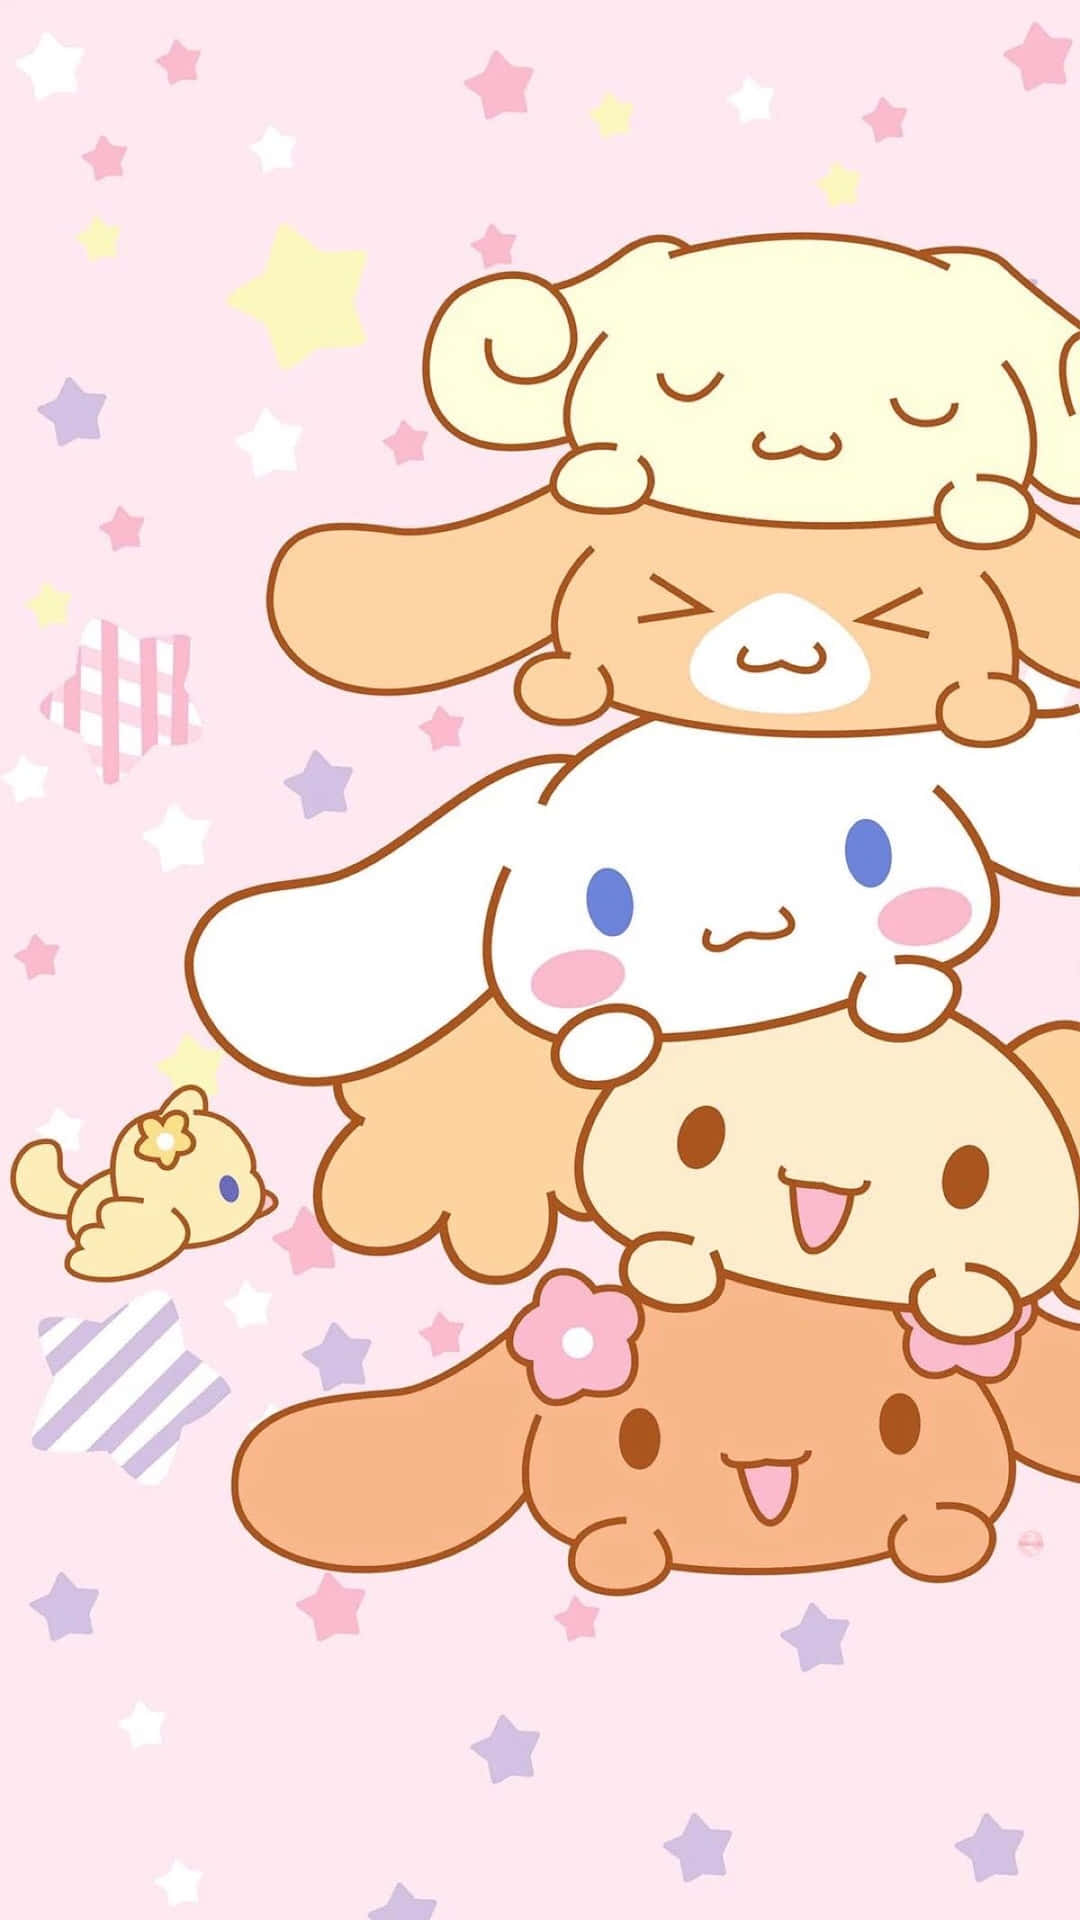 A Group Of Kawaii Animals On A Pink Background Wallpaper